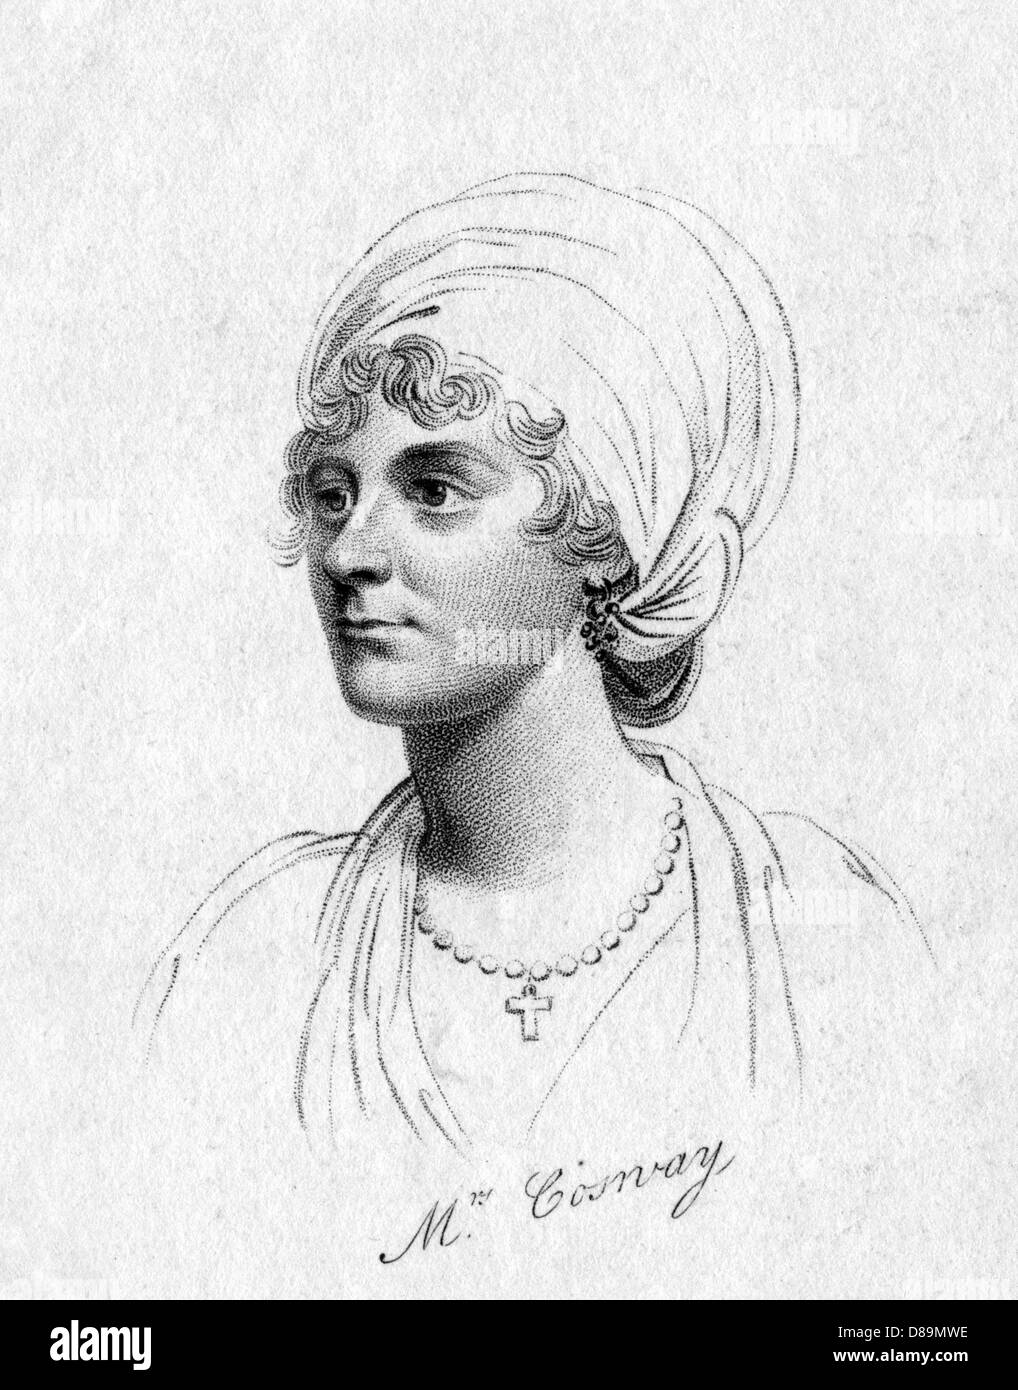 MARIA LOUISA COSWAY Banque D'Images